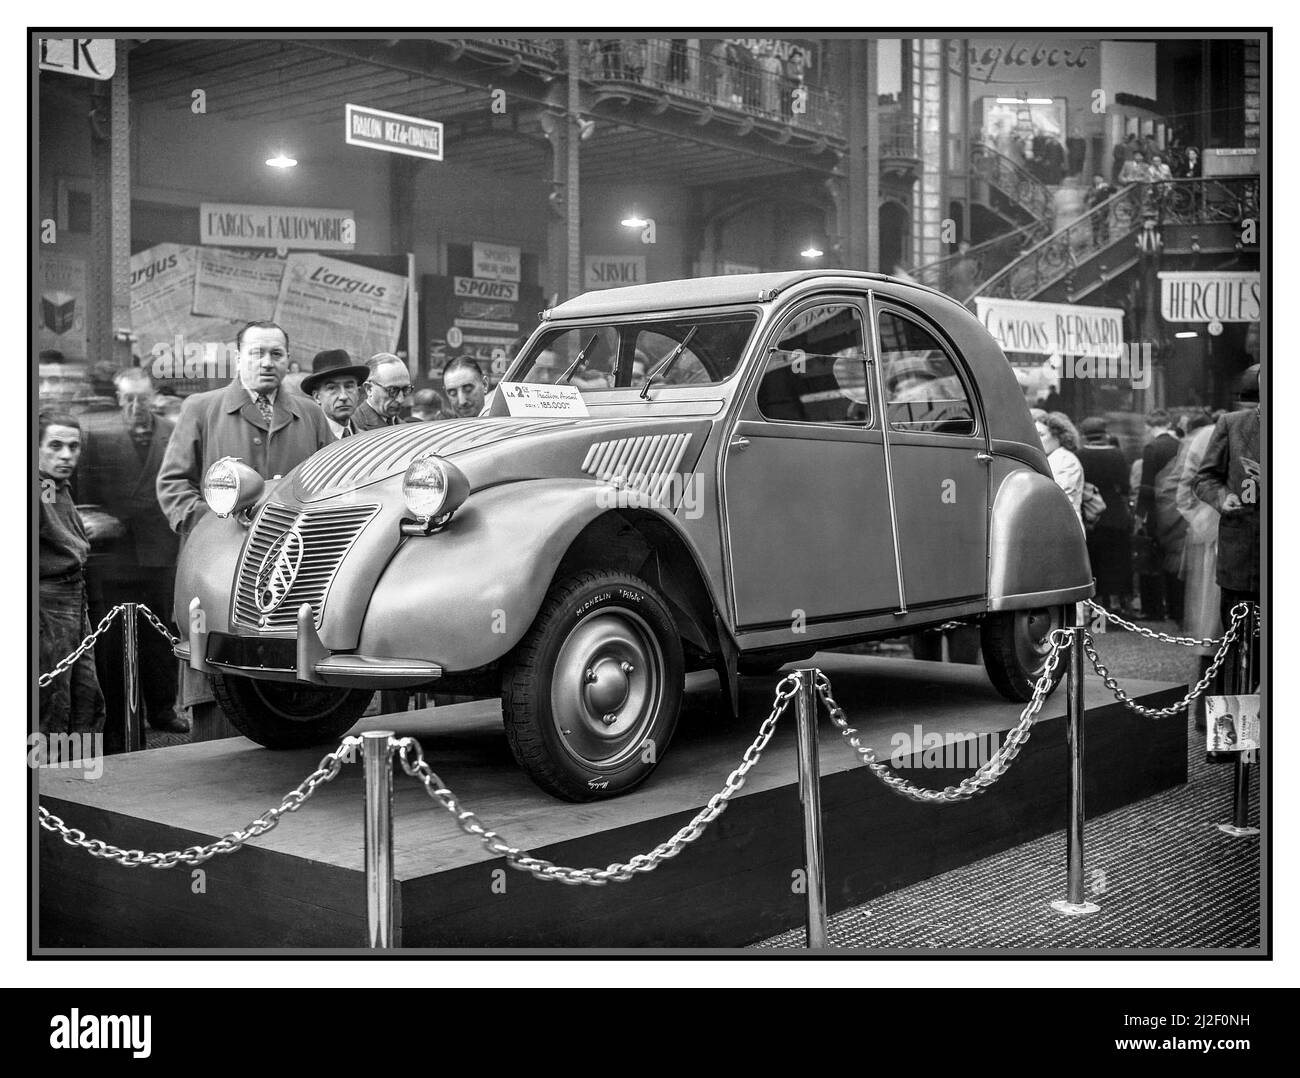 1949 Citroen 2CV launched at Paris France Motor Show priced at  185,000 FFrs  with Michelin Pilote tyres. Post war French launch of revolutionary Citroen Traction Avant  deux chevaux car, which has subsequently achieved iconic status worldwide Stock Photo